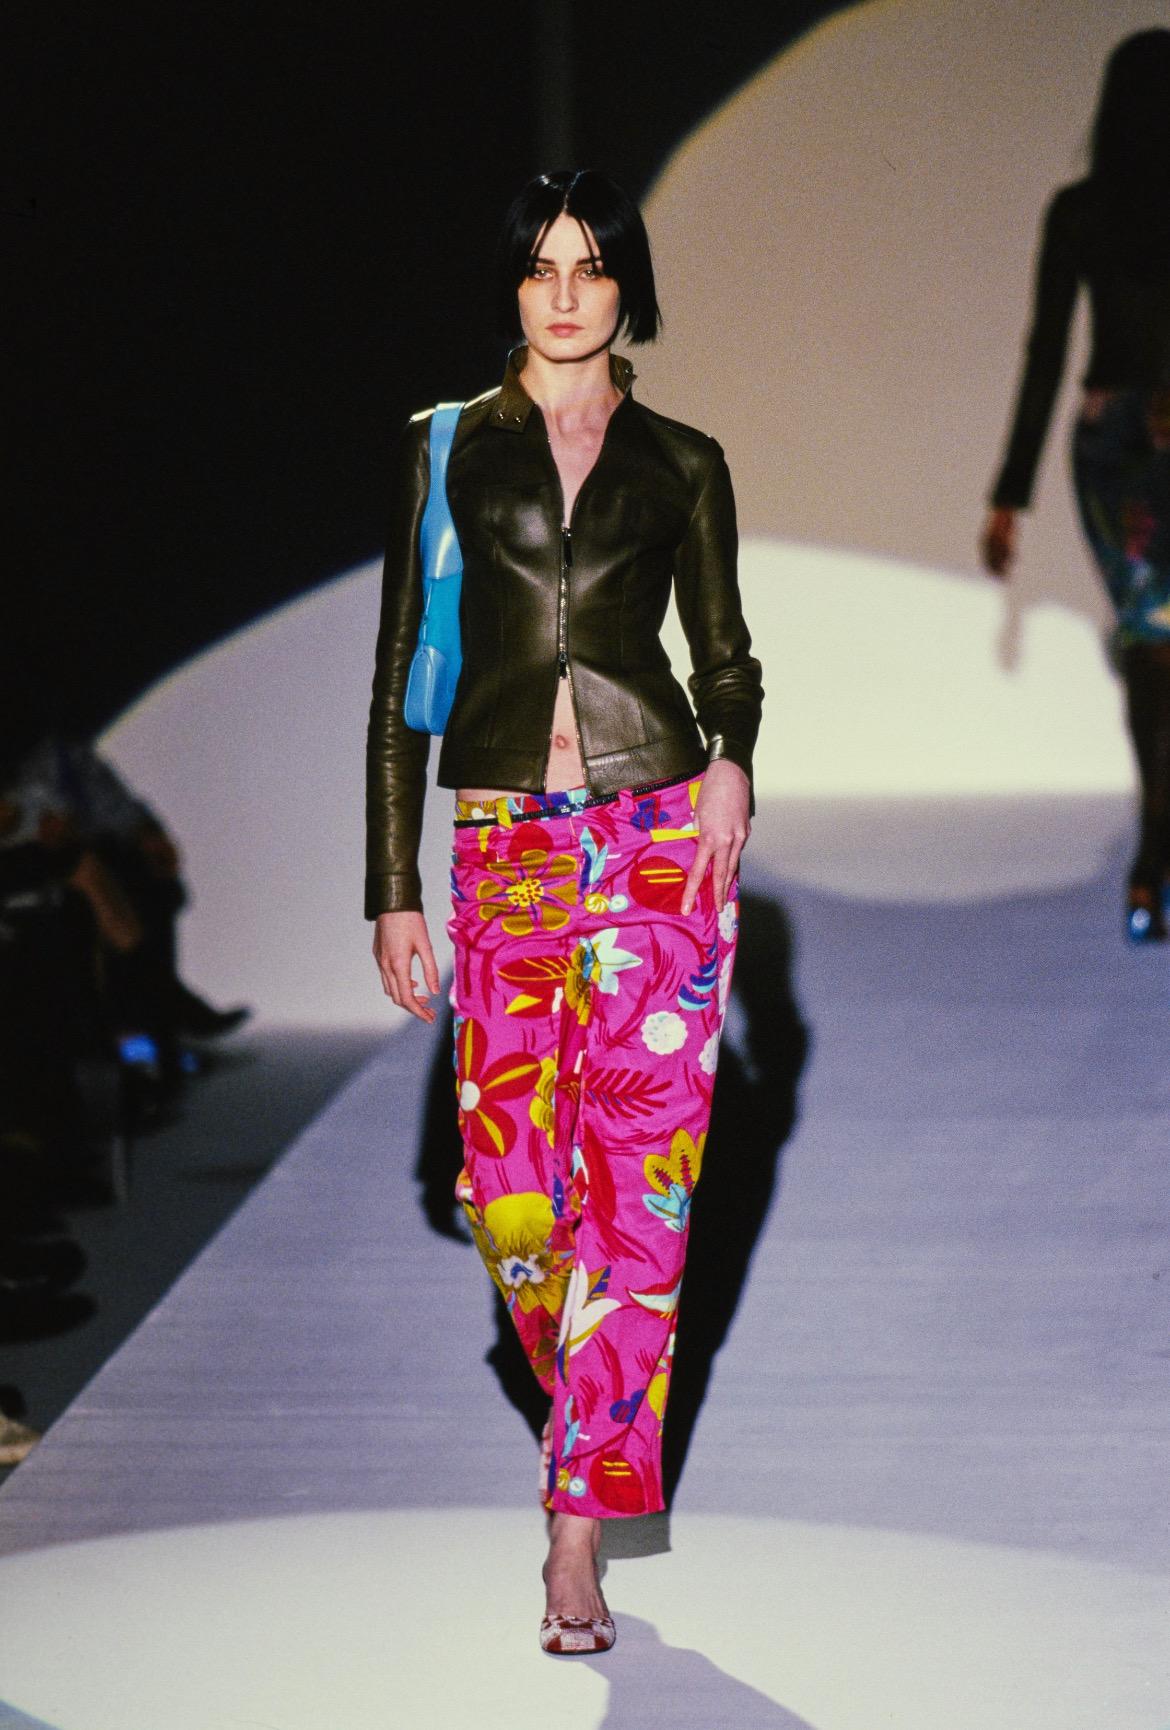 Presenting a pair of incredibly vibrant pink floral Gucci pants, designed by Tom Ford. From the Spring/Summer 1999 collection, these stunning pants debuted on the season's runway as part of look 5 modeled by Erin O'Connor. These bright pants boast